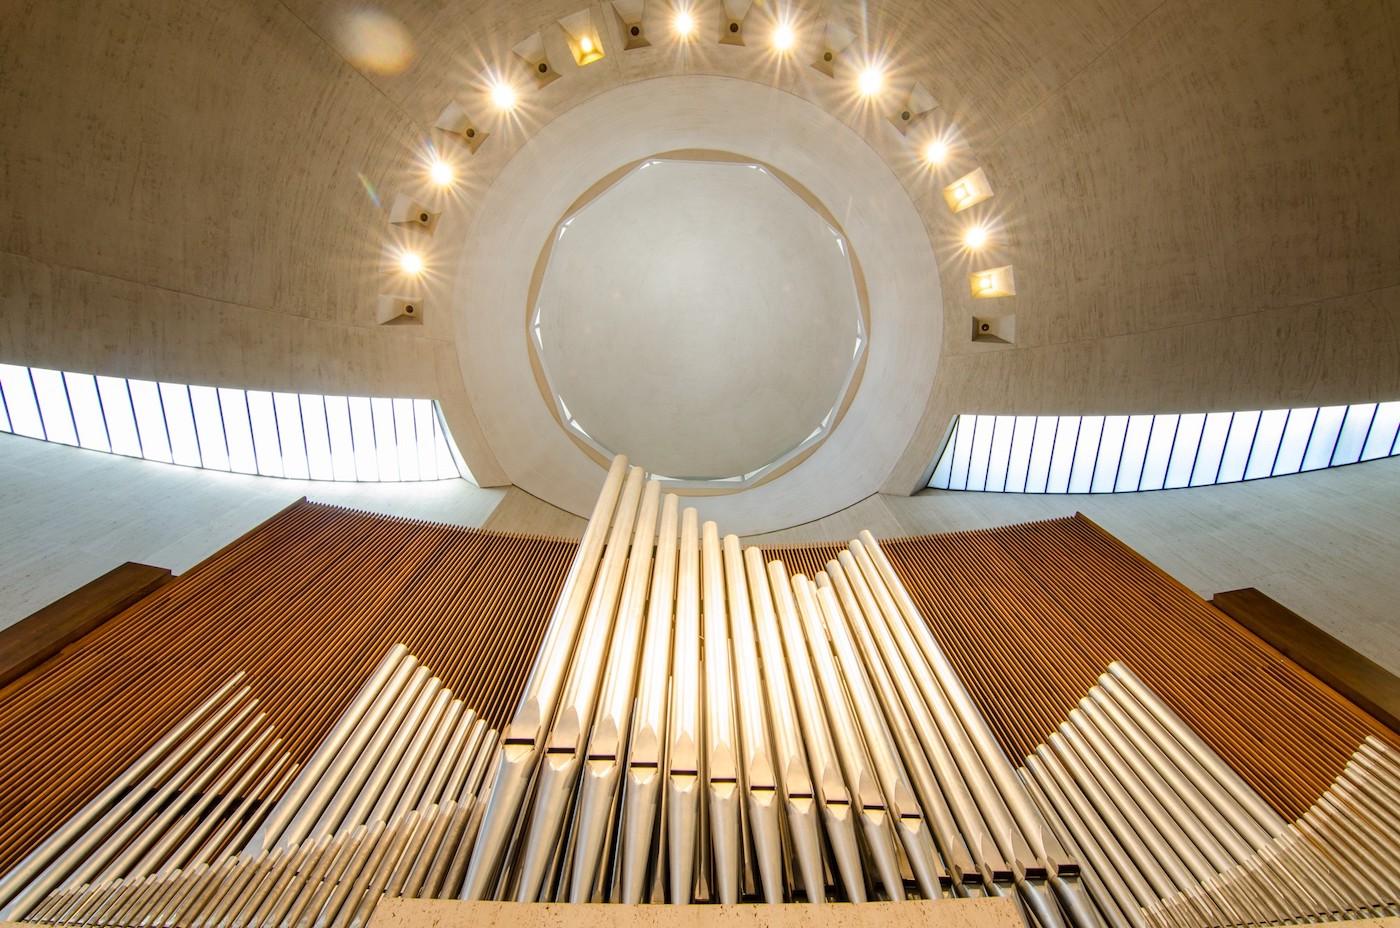 Looking up at the vertical organ pipes of Seventeenth Church of Christ, Scientist in Chicago